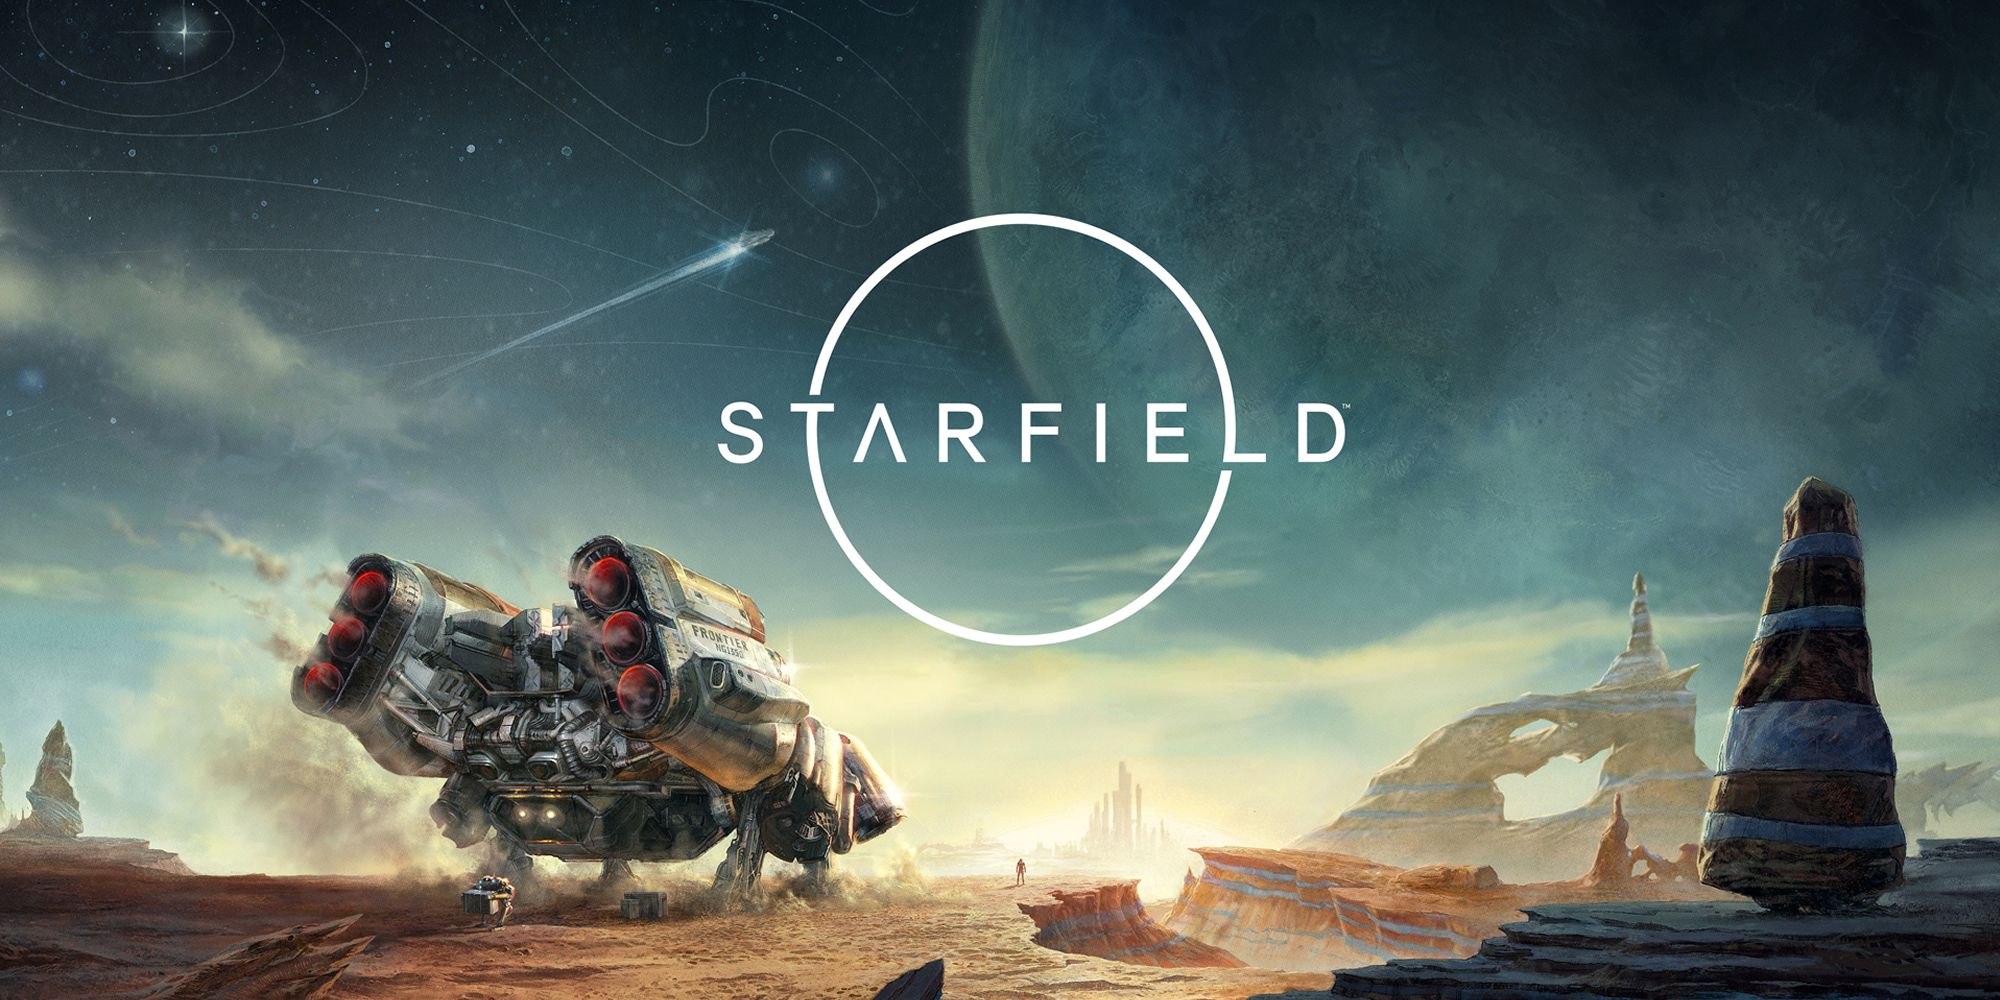 Starfield Title Art Showing A Ship Looking Out On A Planet Surface